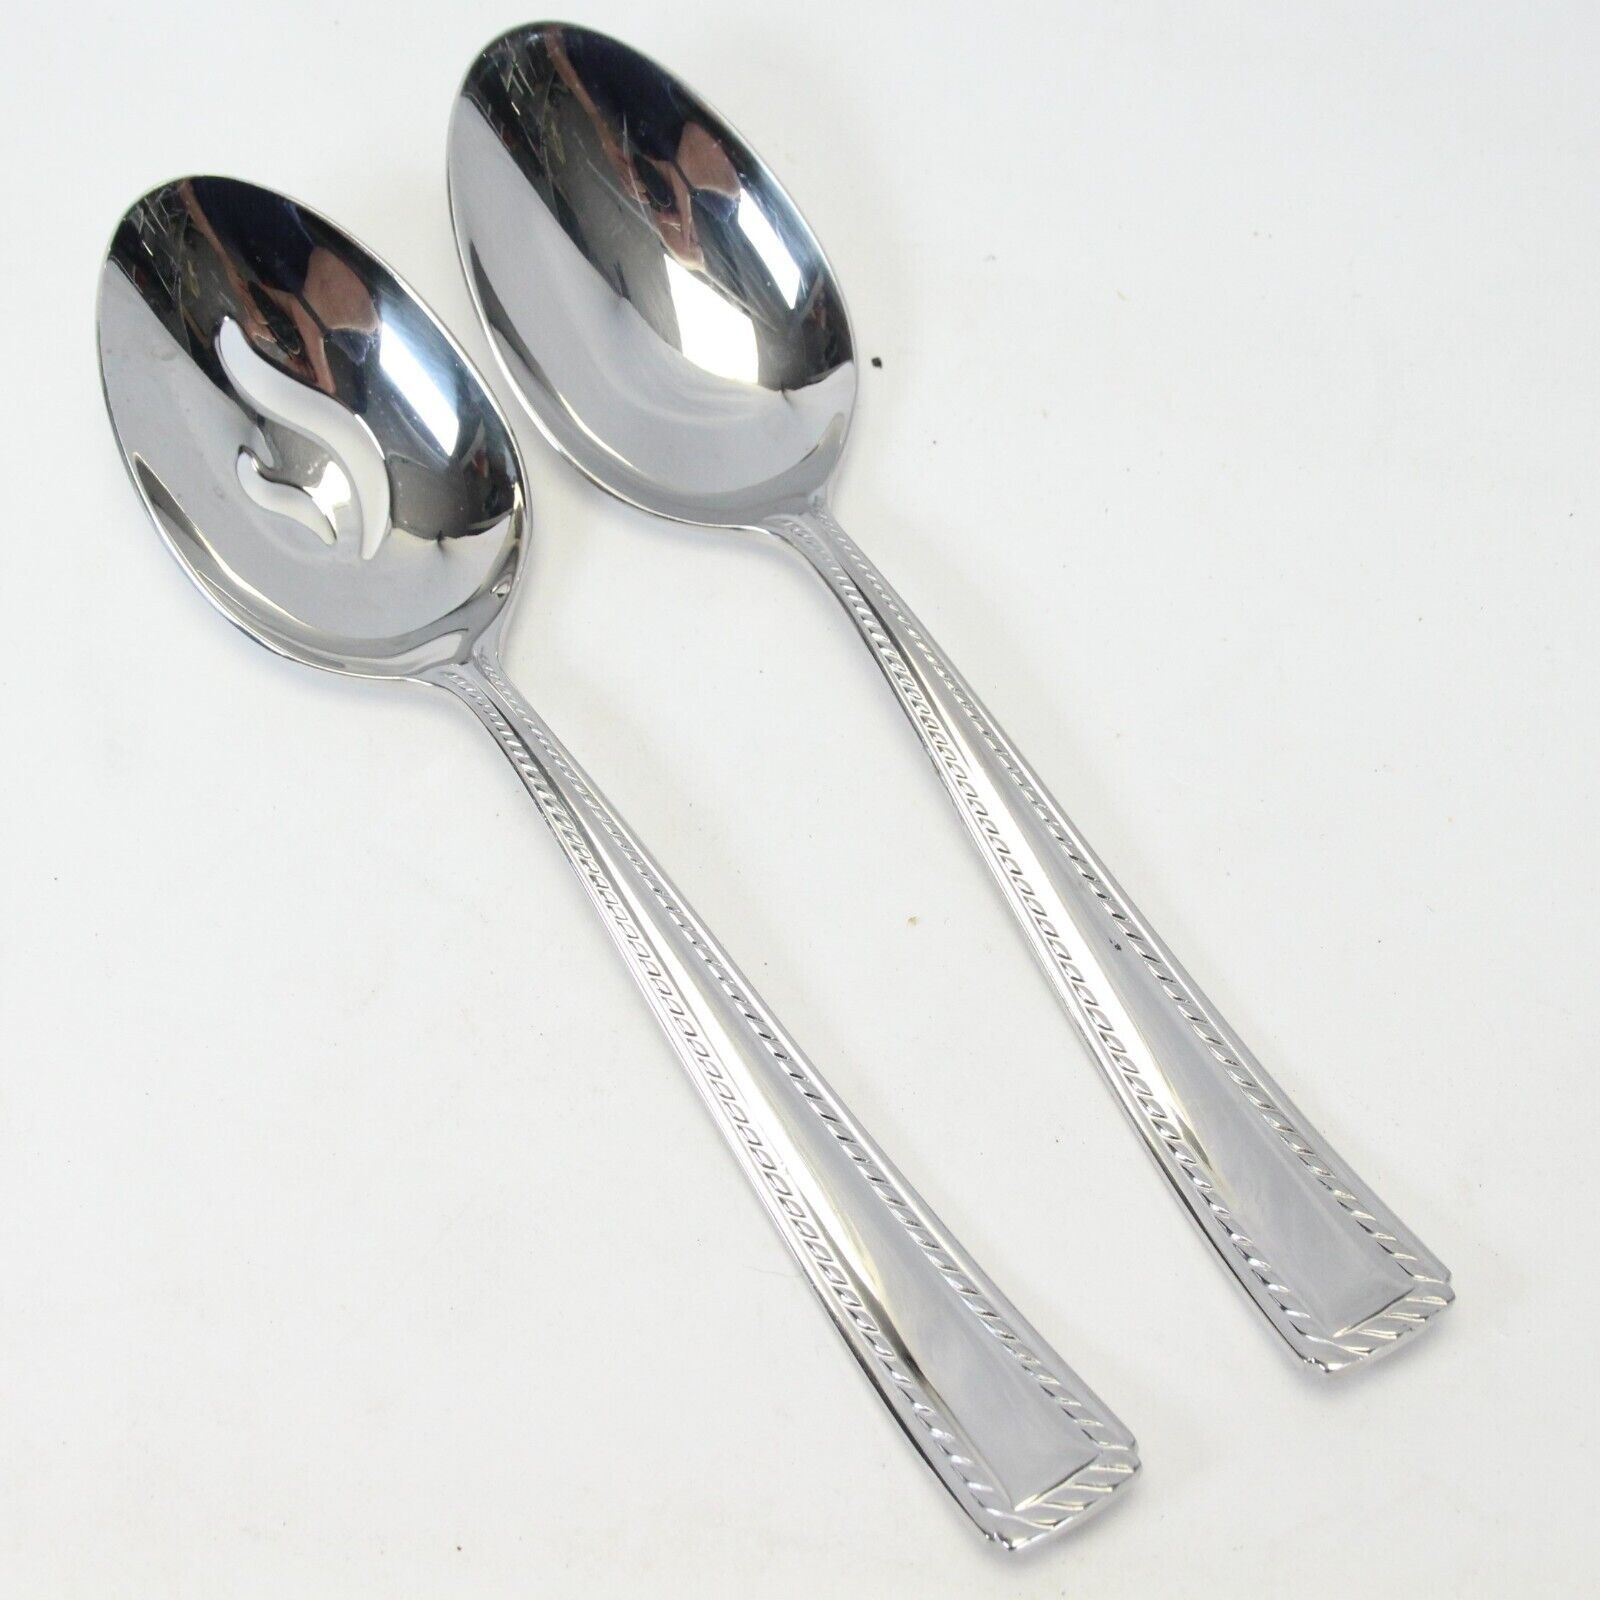 Oneida Flourish Serving Spoons 8 7/8" Stainless Rope Edge Lot of 2 - $39.19